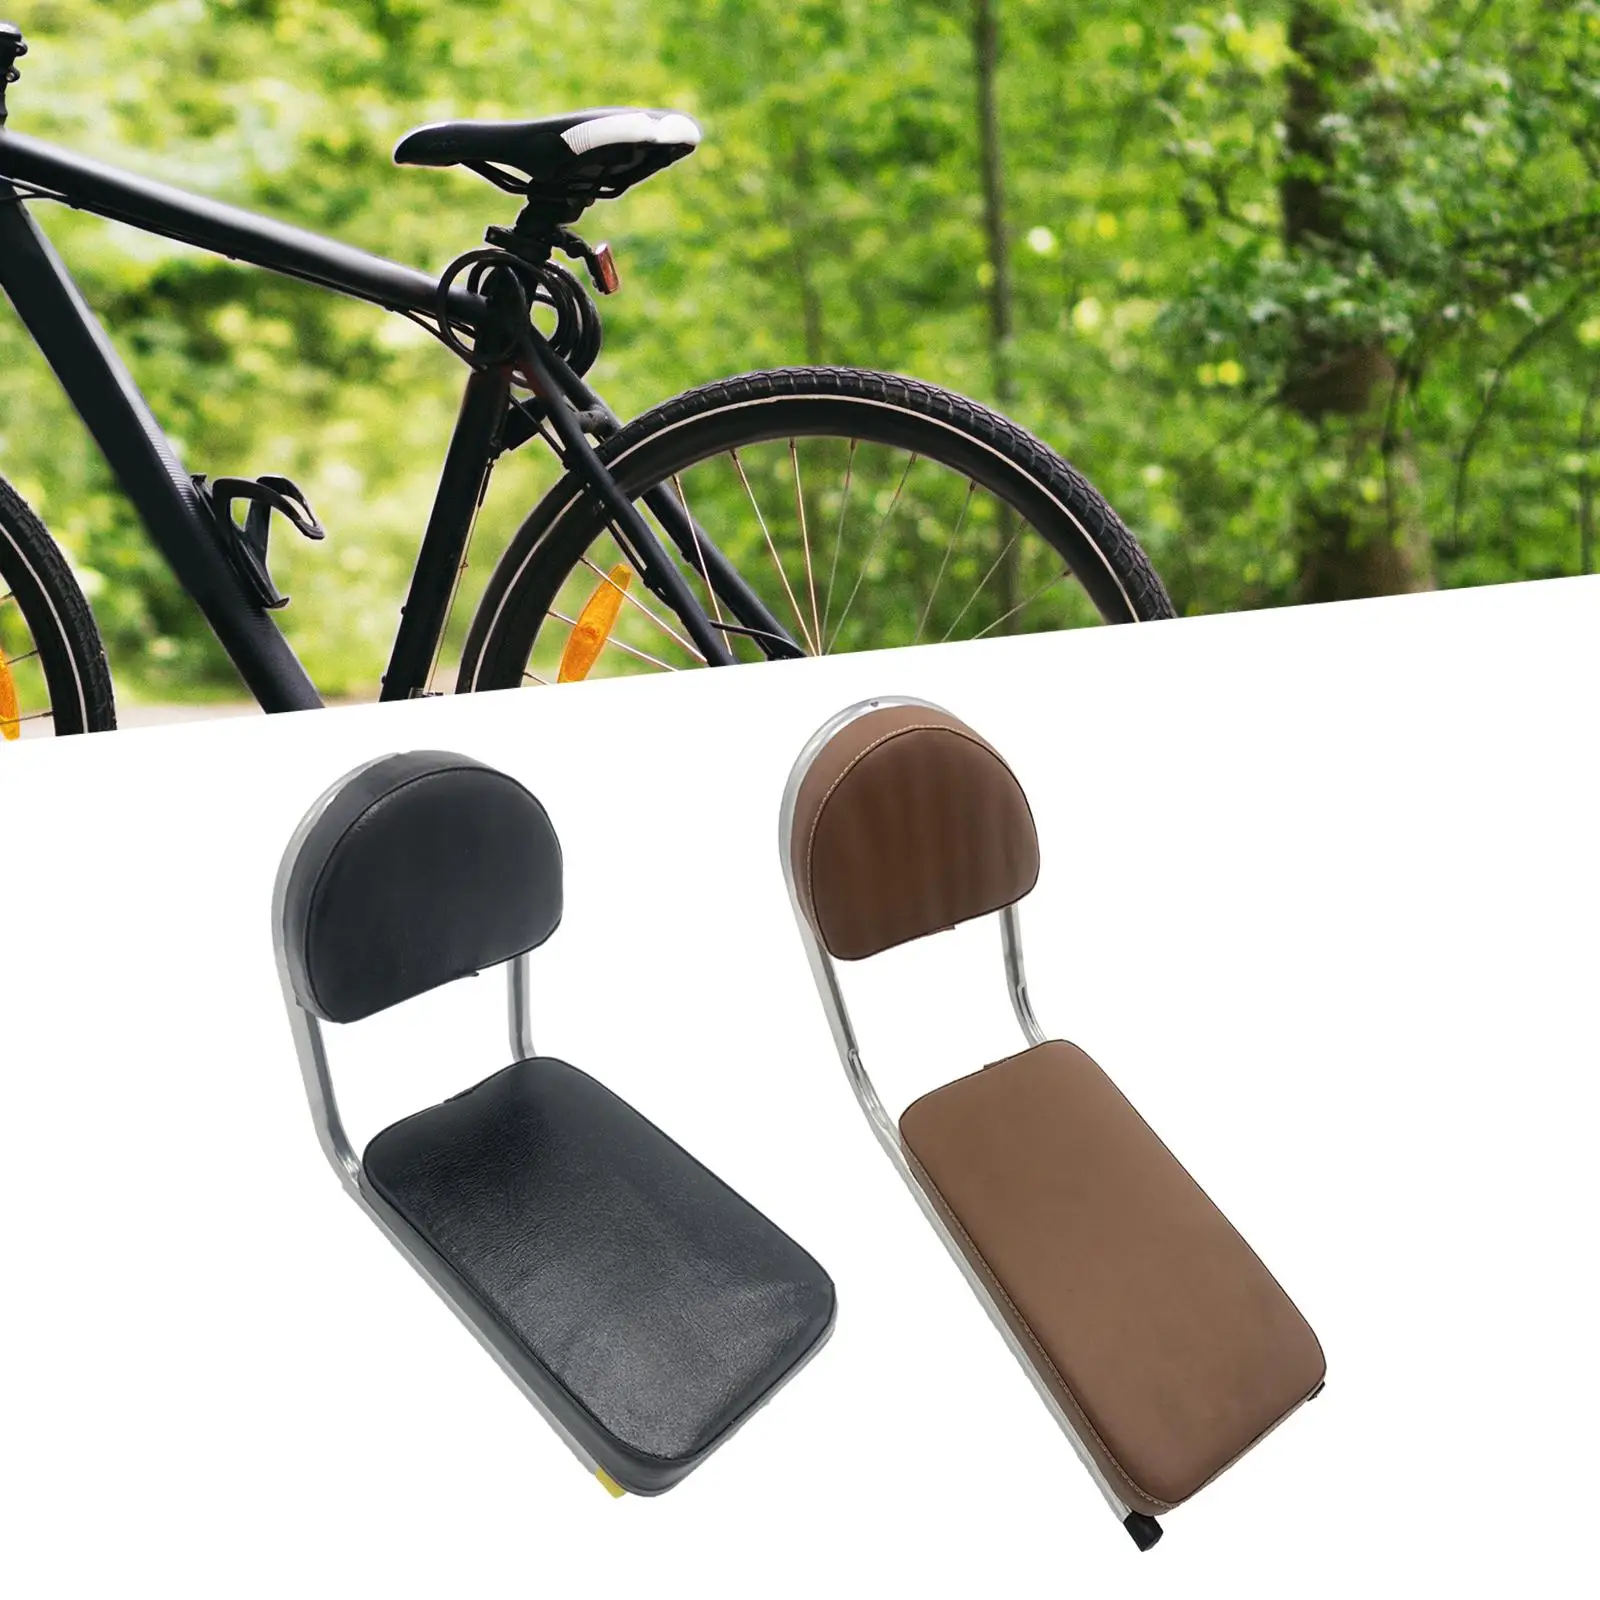 Bicycle Rear Seat Portable Easy Cleaning with Back Rest Bike Back Seat Back Saddle for Touring Outdoor Biking Riding Accessory